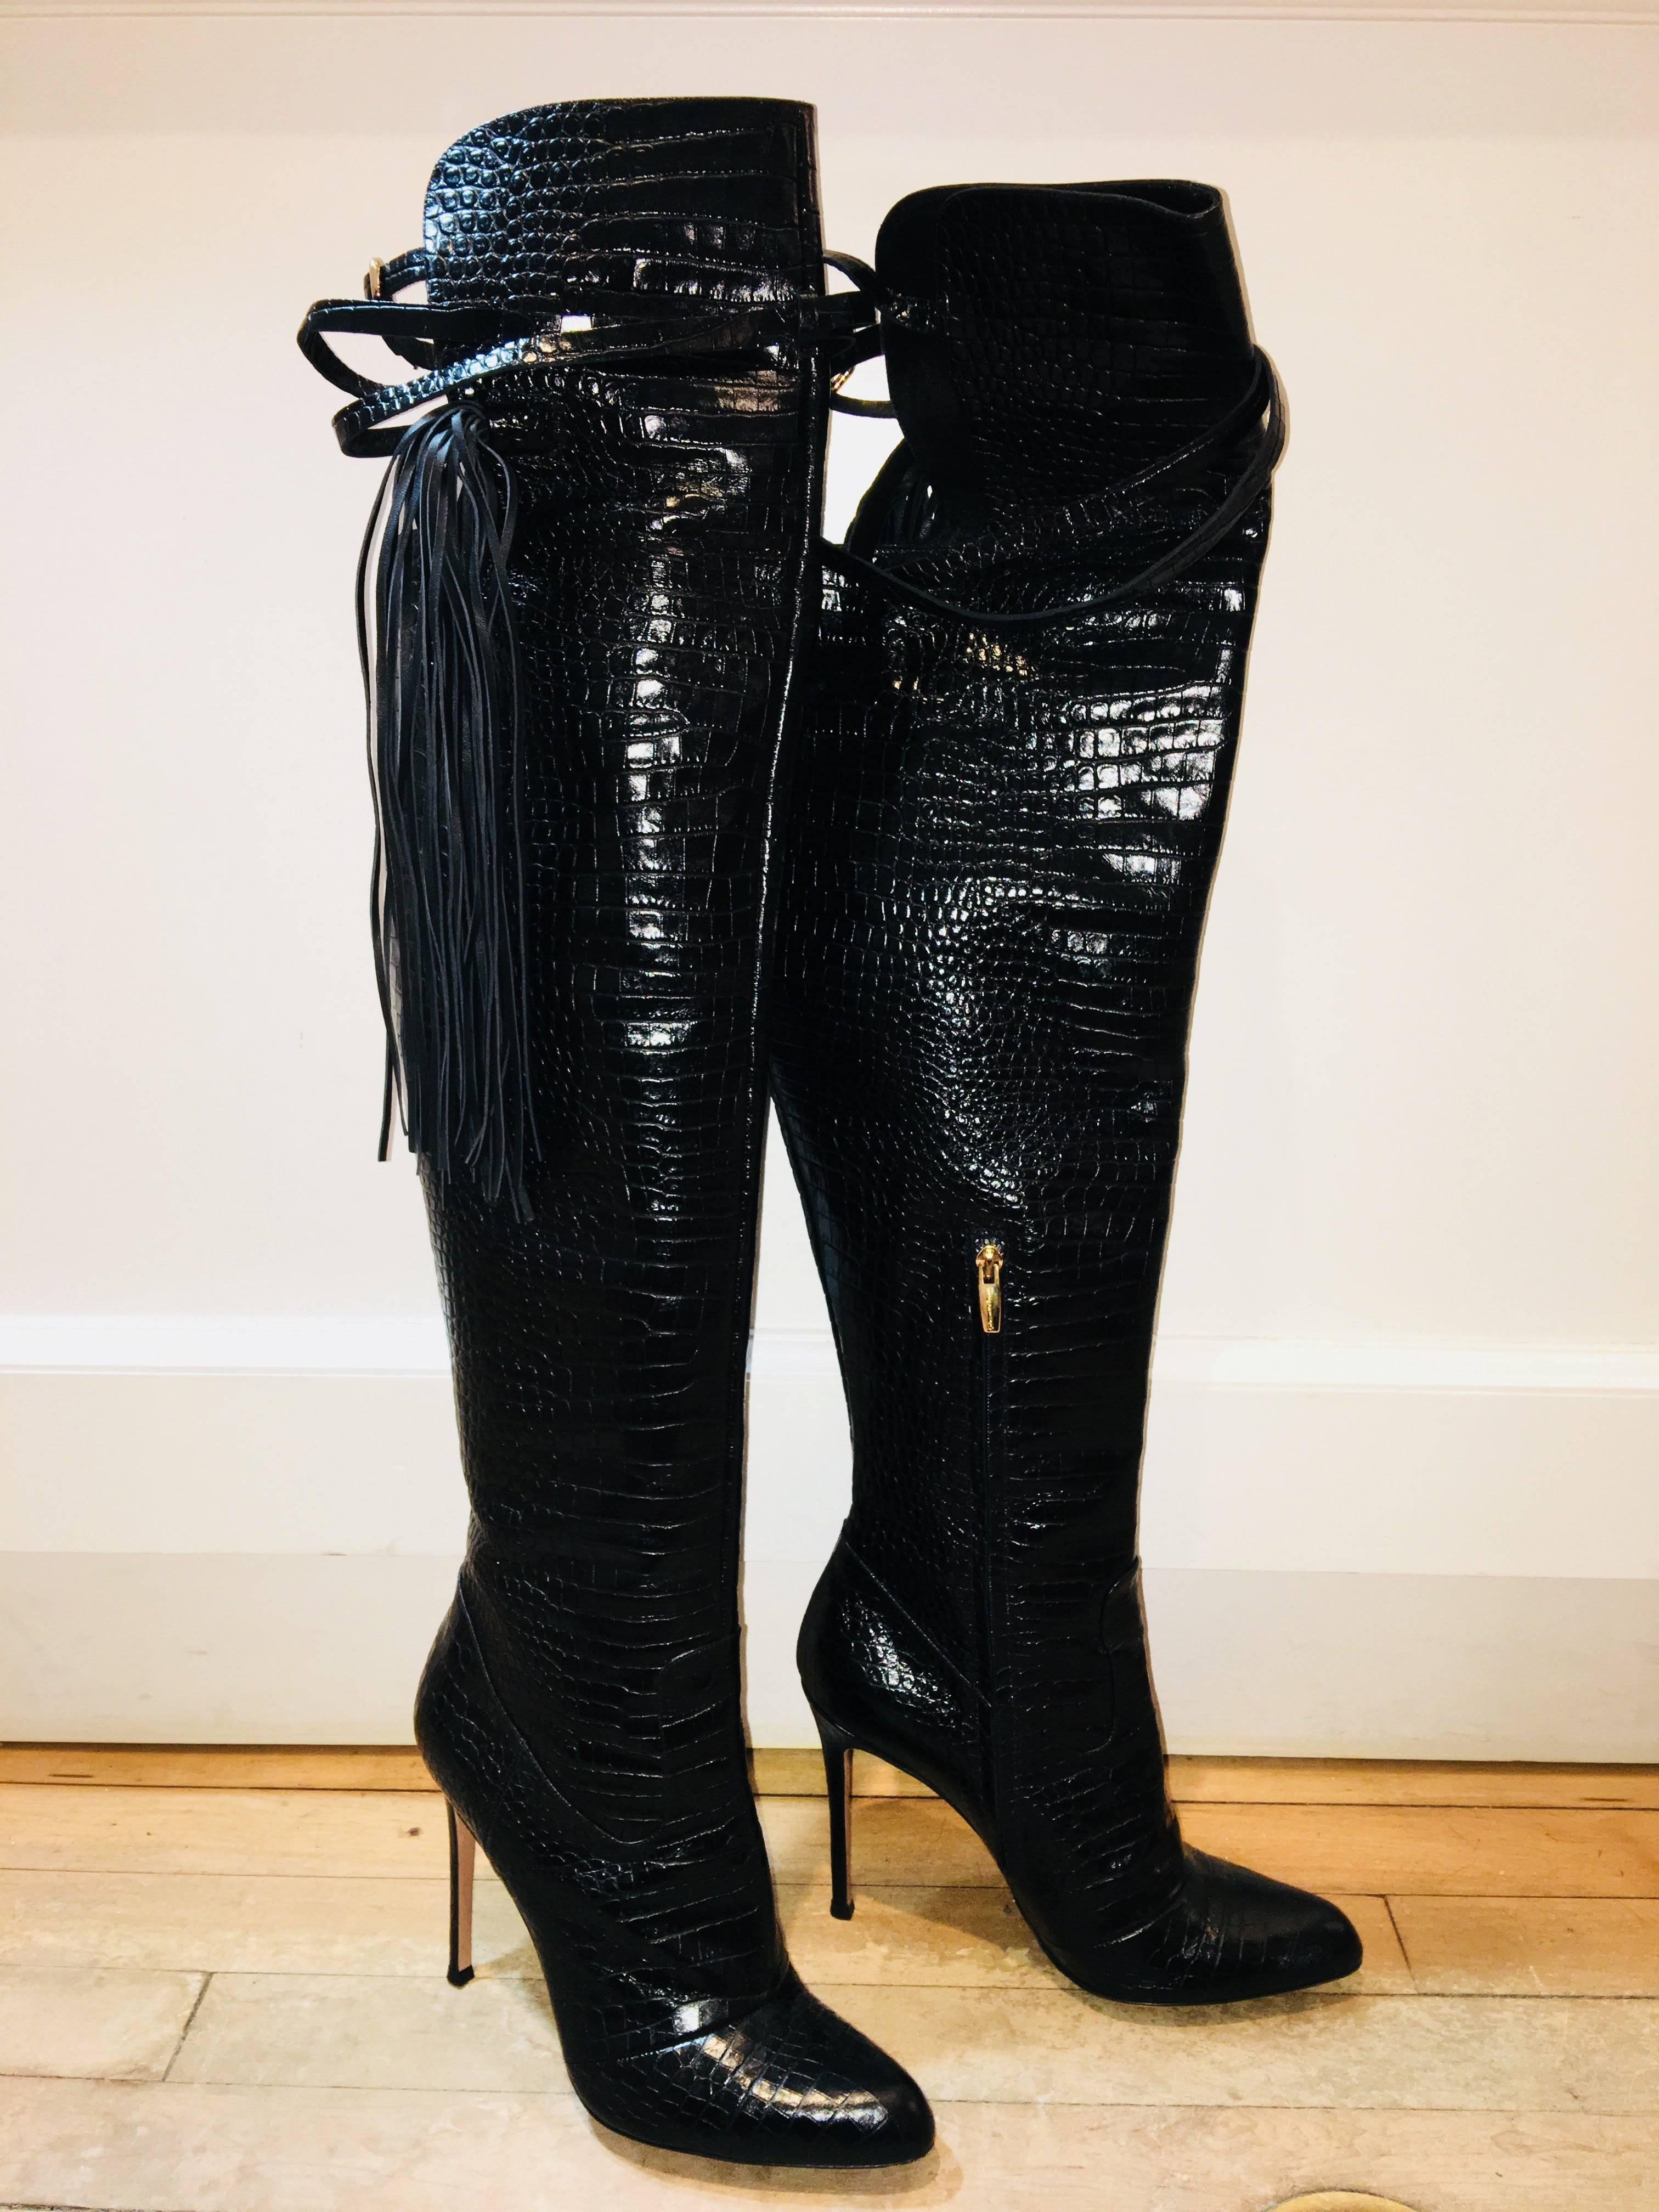 Gianvito Rossi Croc-Embossed Thigh High Boots with Stiletto Heel, Side Zippers and Tassel.